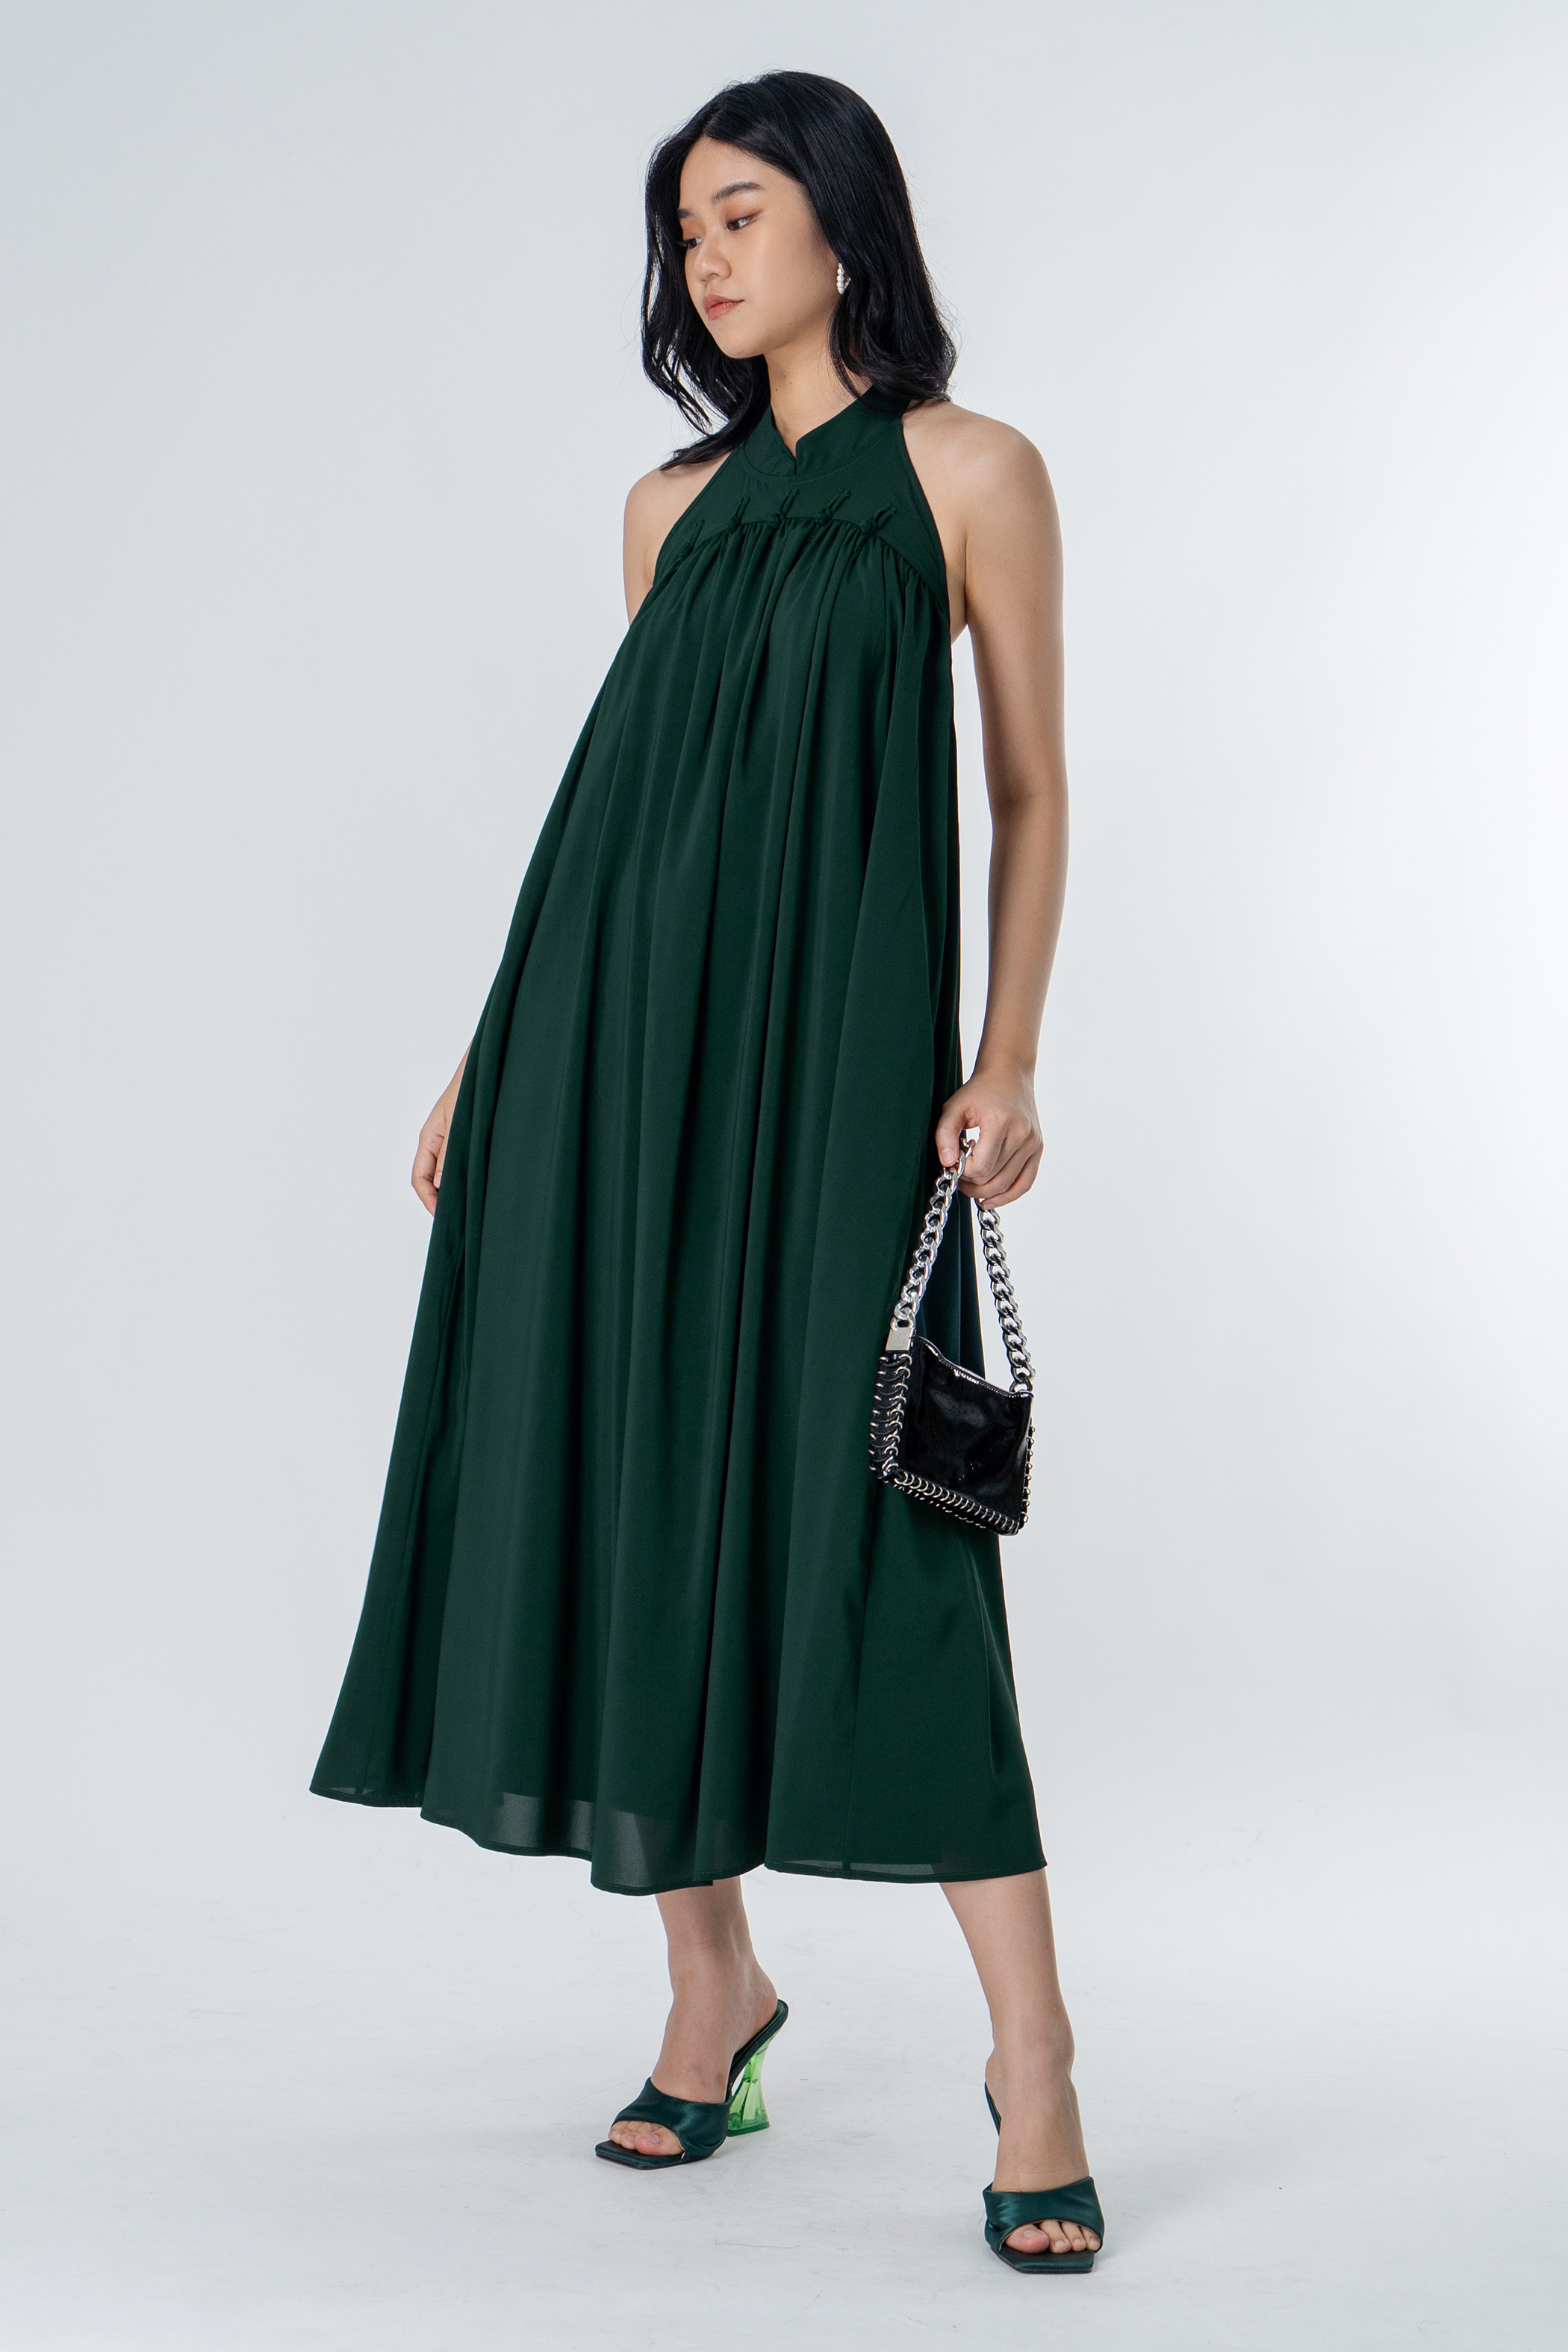 Wave Length Dress in Emerald | Young Hungry Free